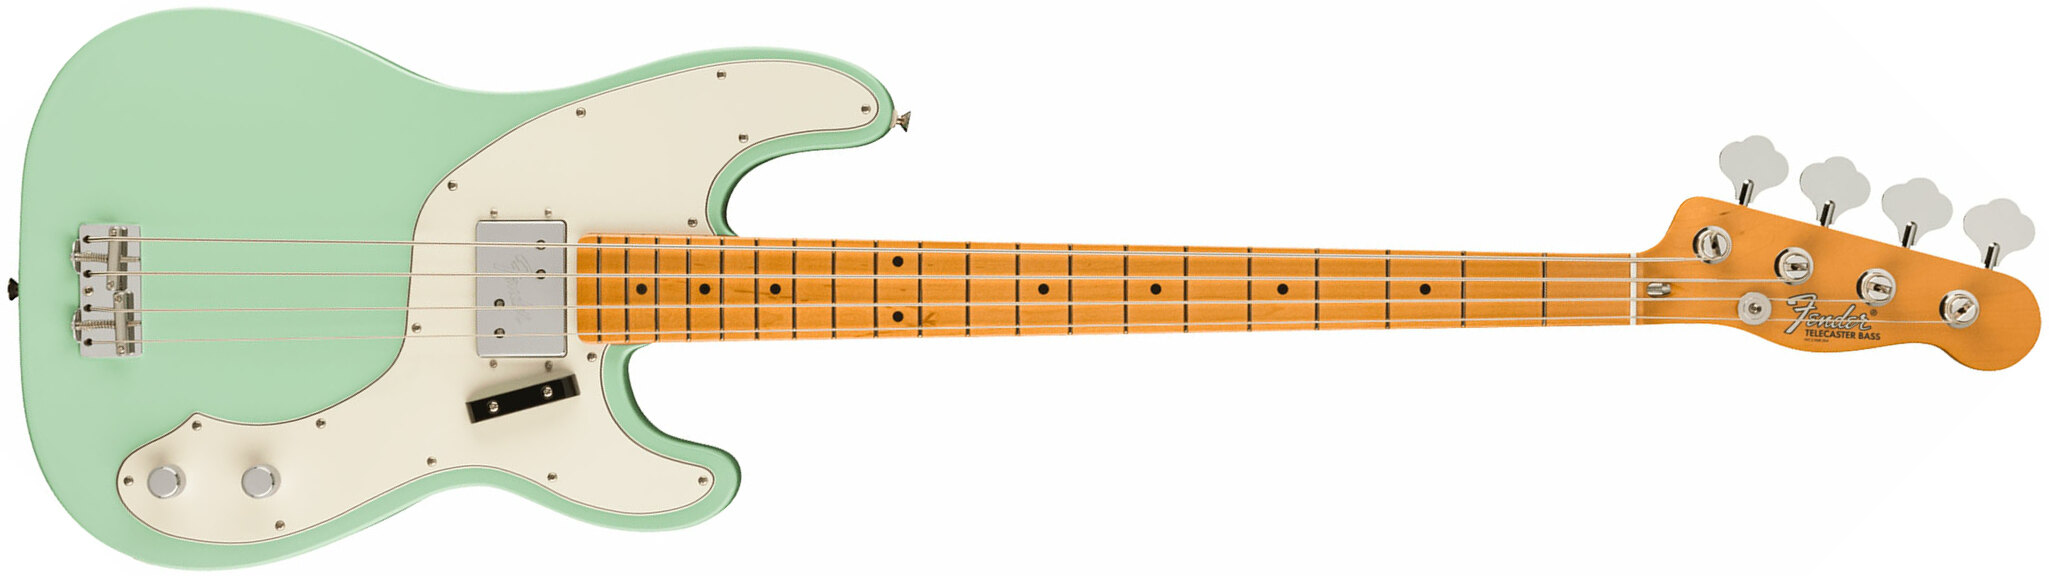 Fender Tele Bass 70s Vintera 2 Mex Mn - Surf Green - Solid body electric bass - Main picture